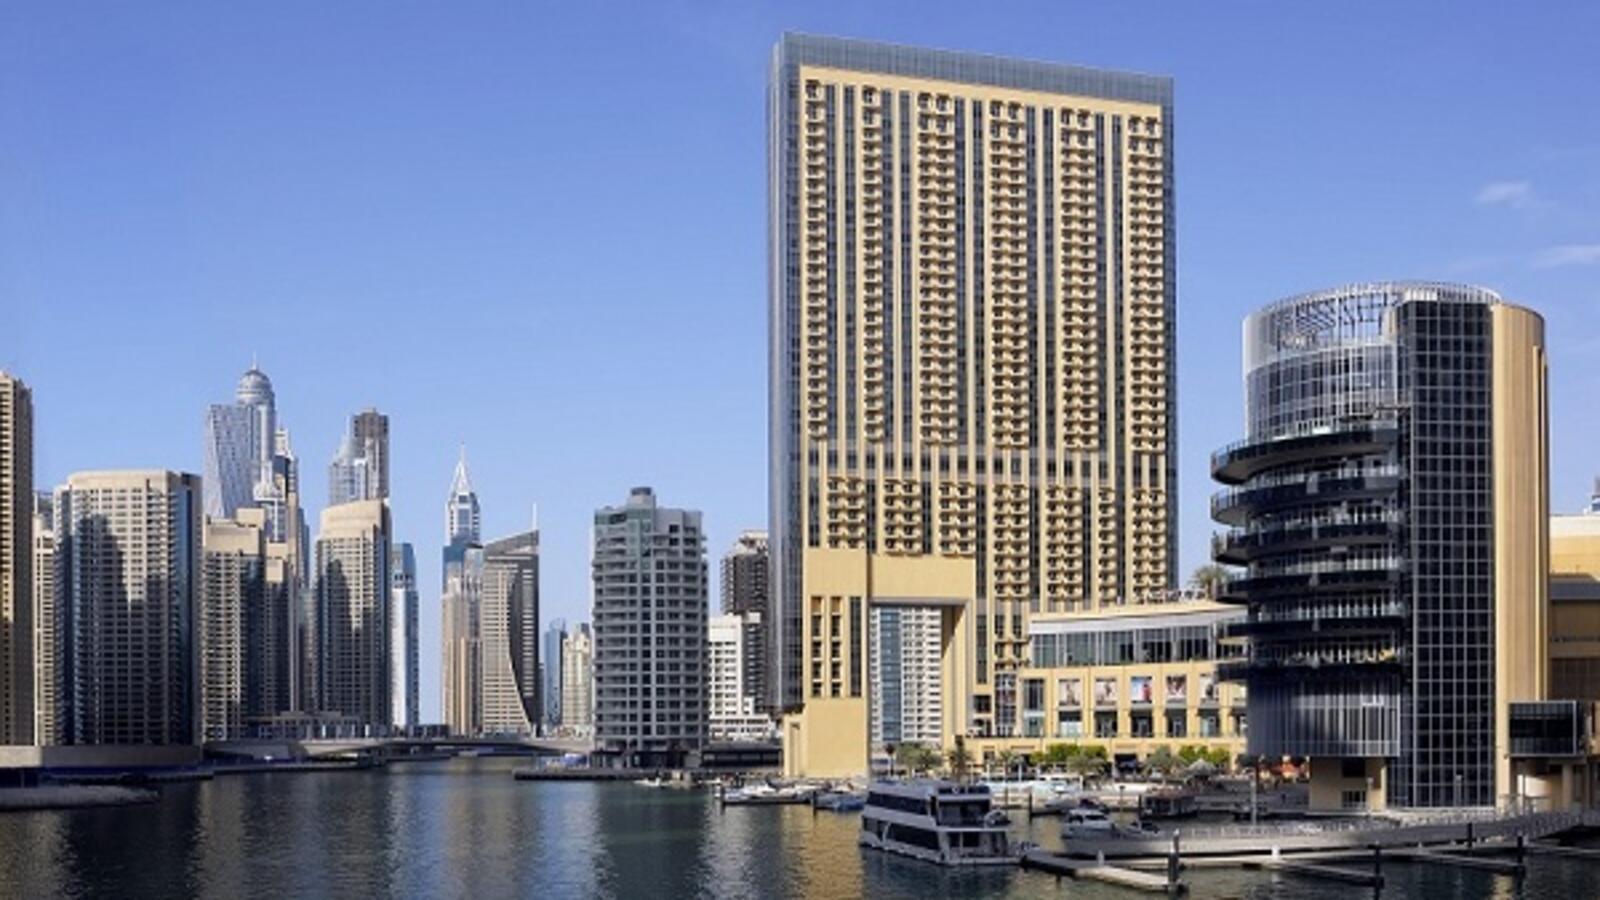 Can't Choose Where To Live In Dubai This App Can Help - Address Dubai Marina Hotel , HD Wallpaper & Backgrounds